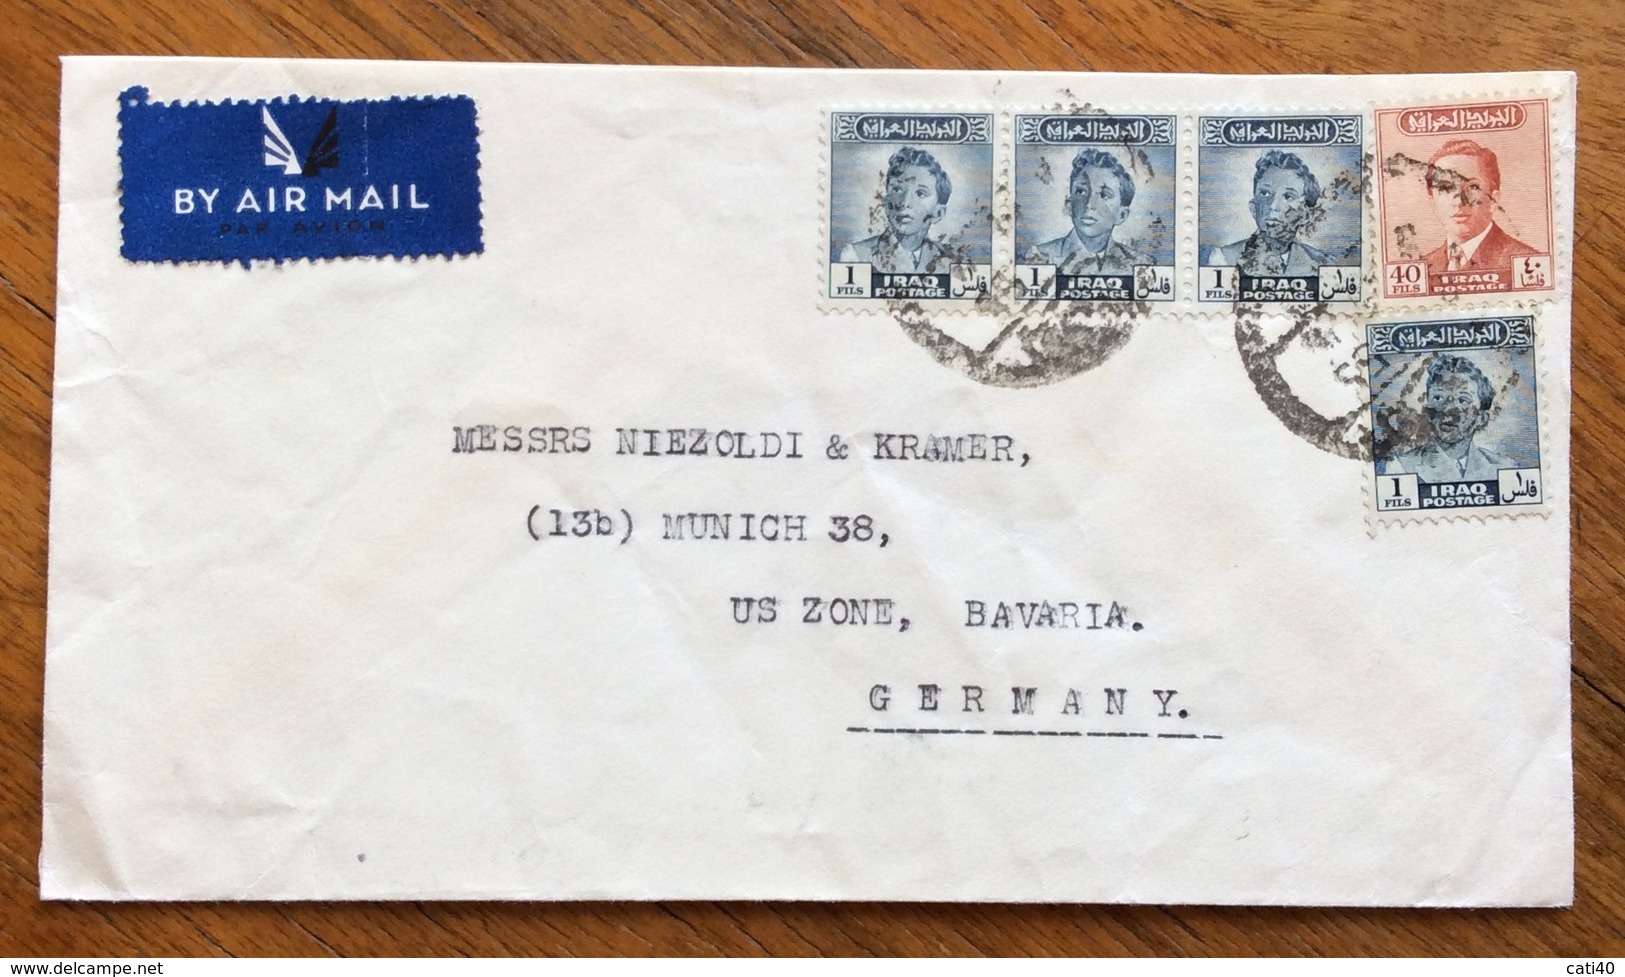 IRAQ  ENVELOPE COVER AIR MAIL   FROM BAGHDAD  TO  MONACO GERMANY  1955 - Iraq